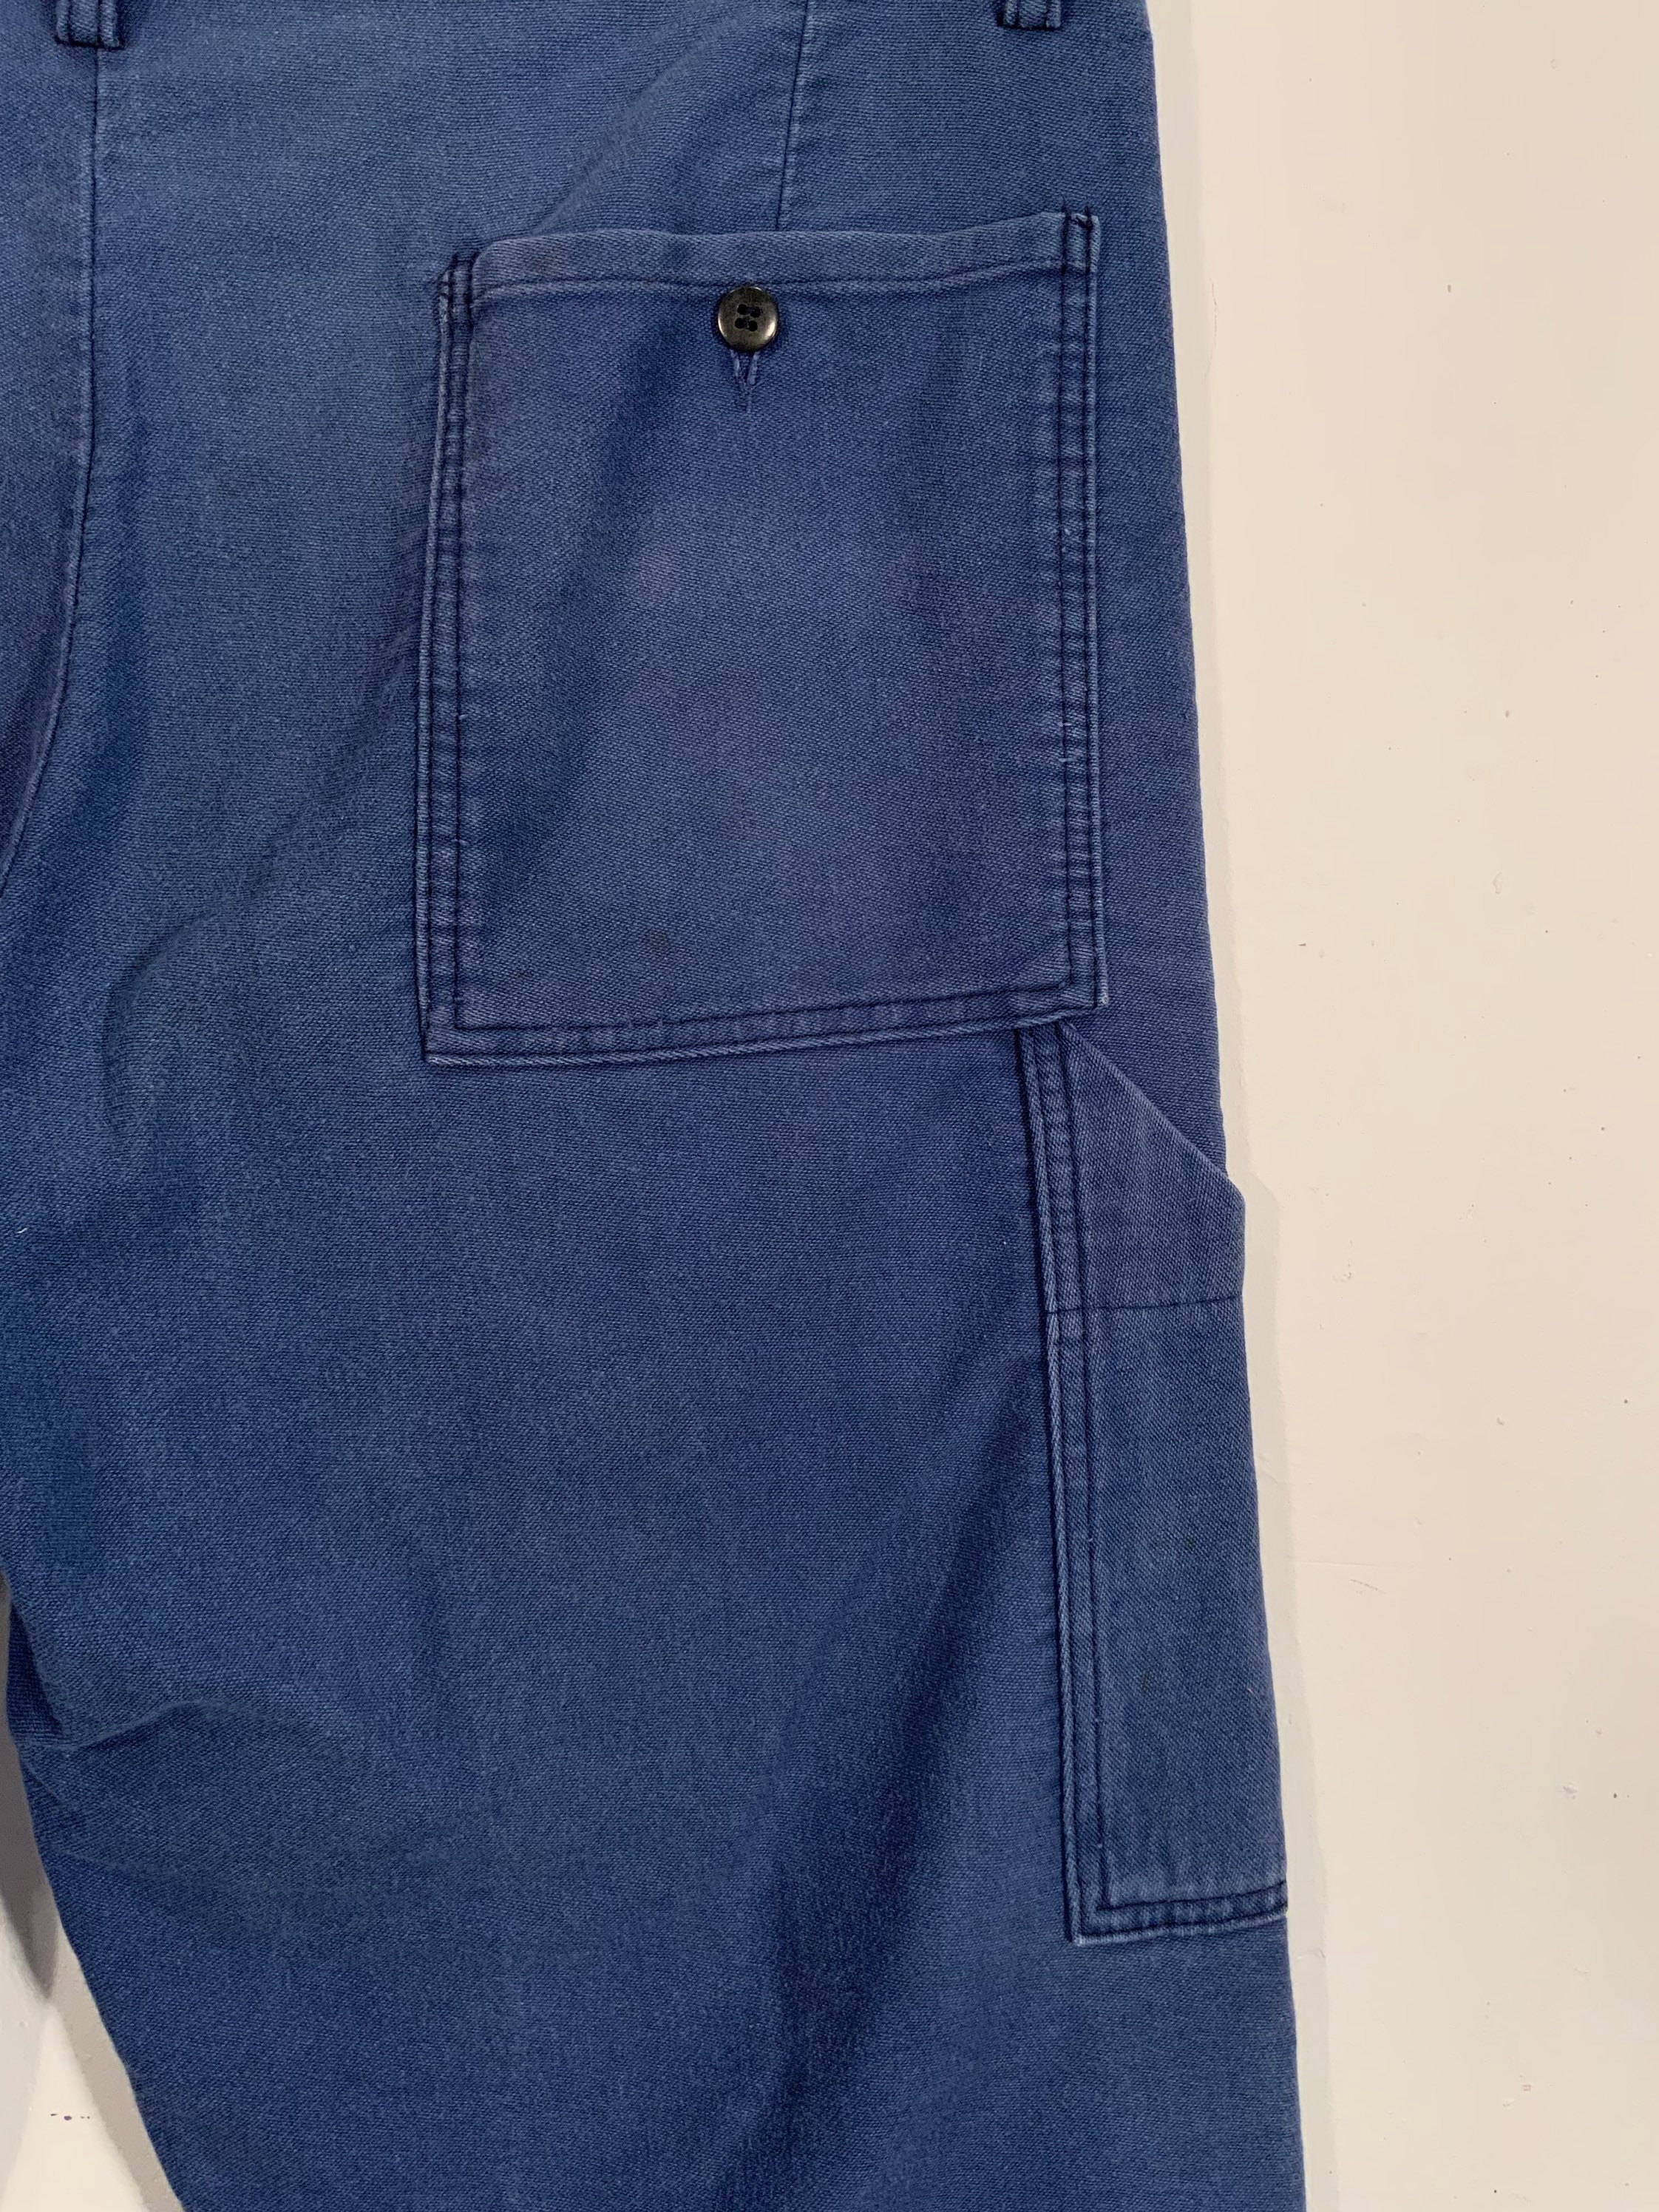 100% cotton workwear factory trouser in soft electric blue | Etsy